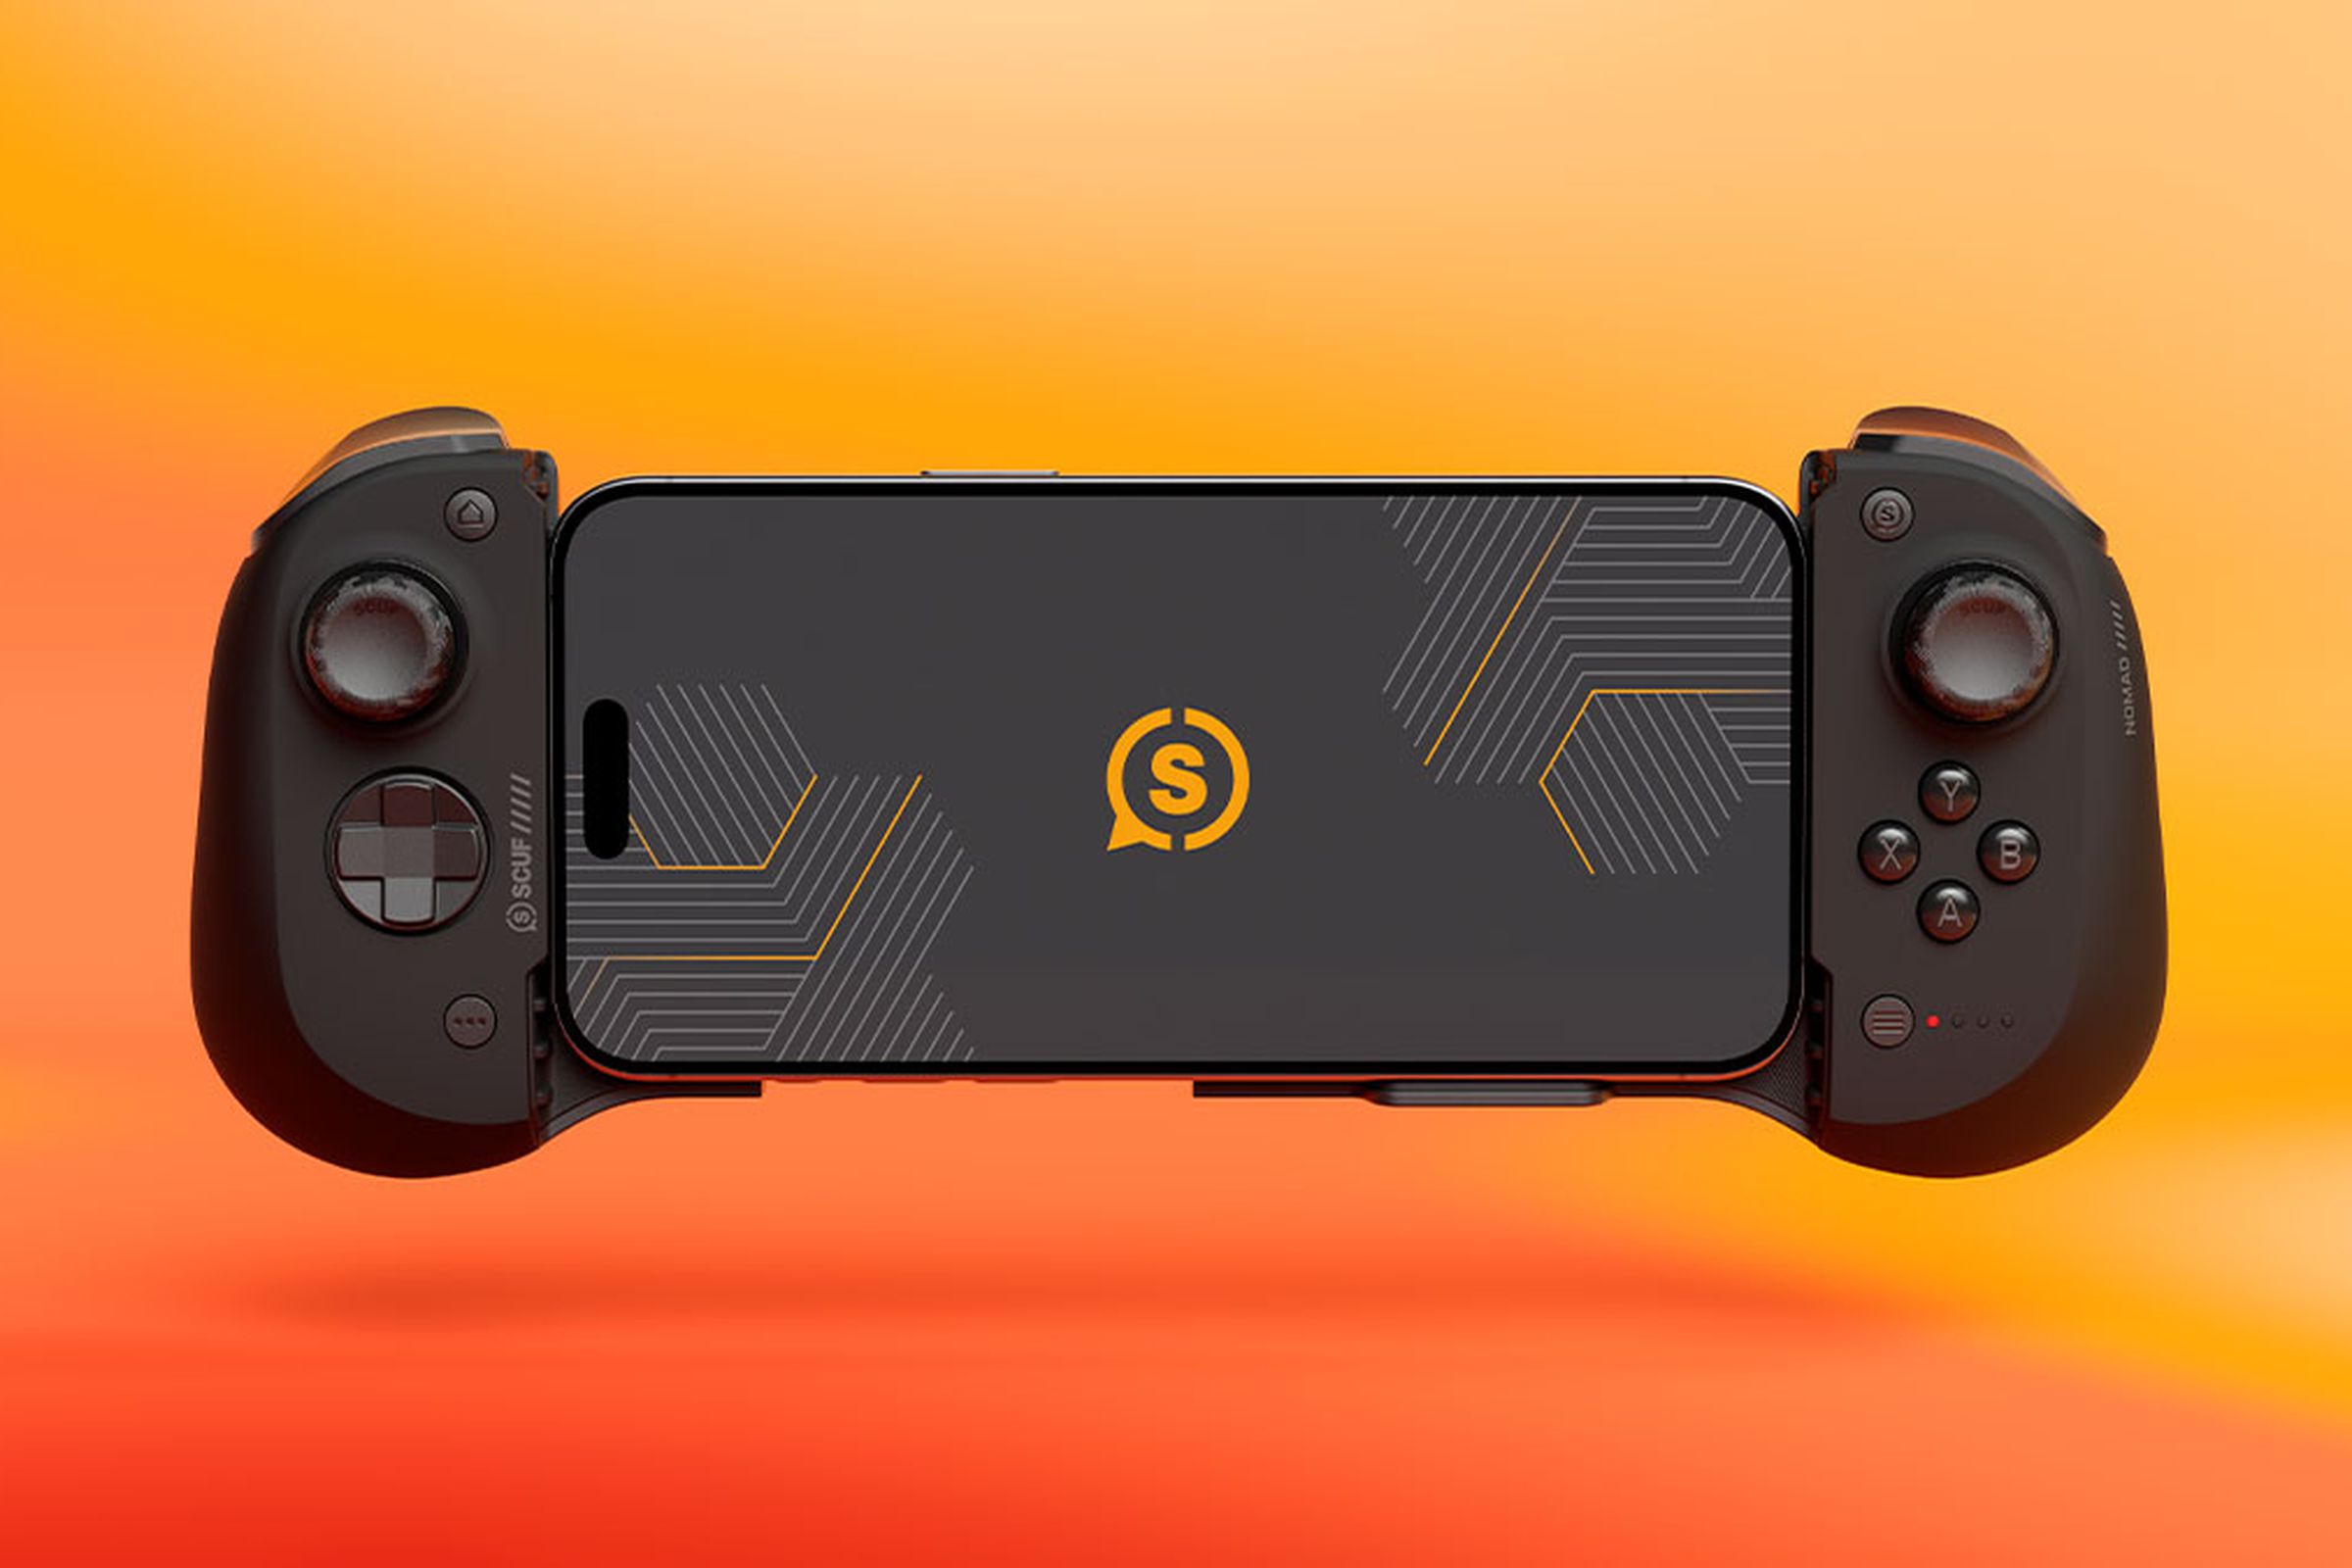 The Scuf Nomad controller with an iPhone clamped into its center, on an orange background.